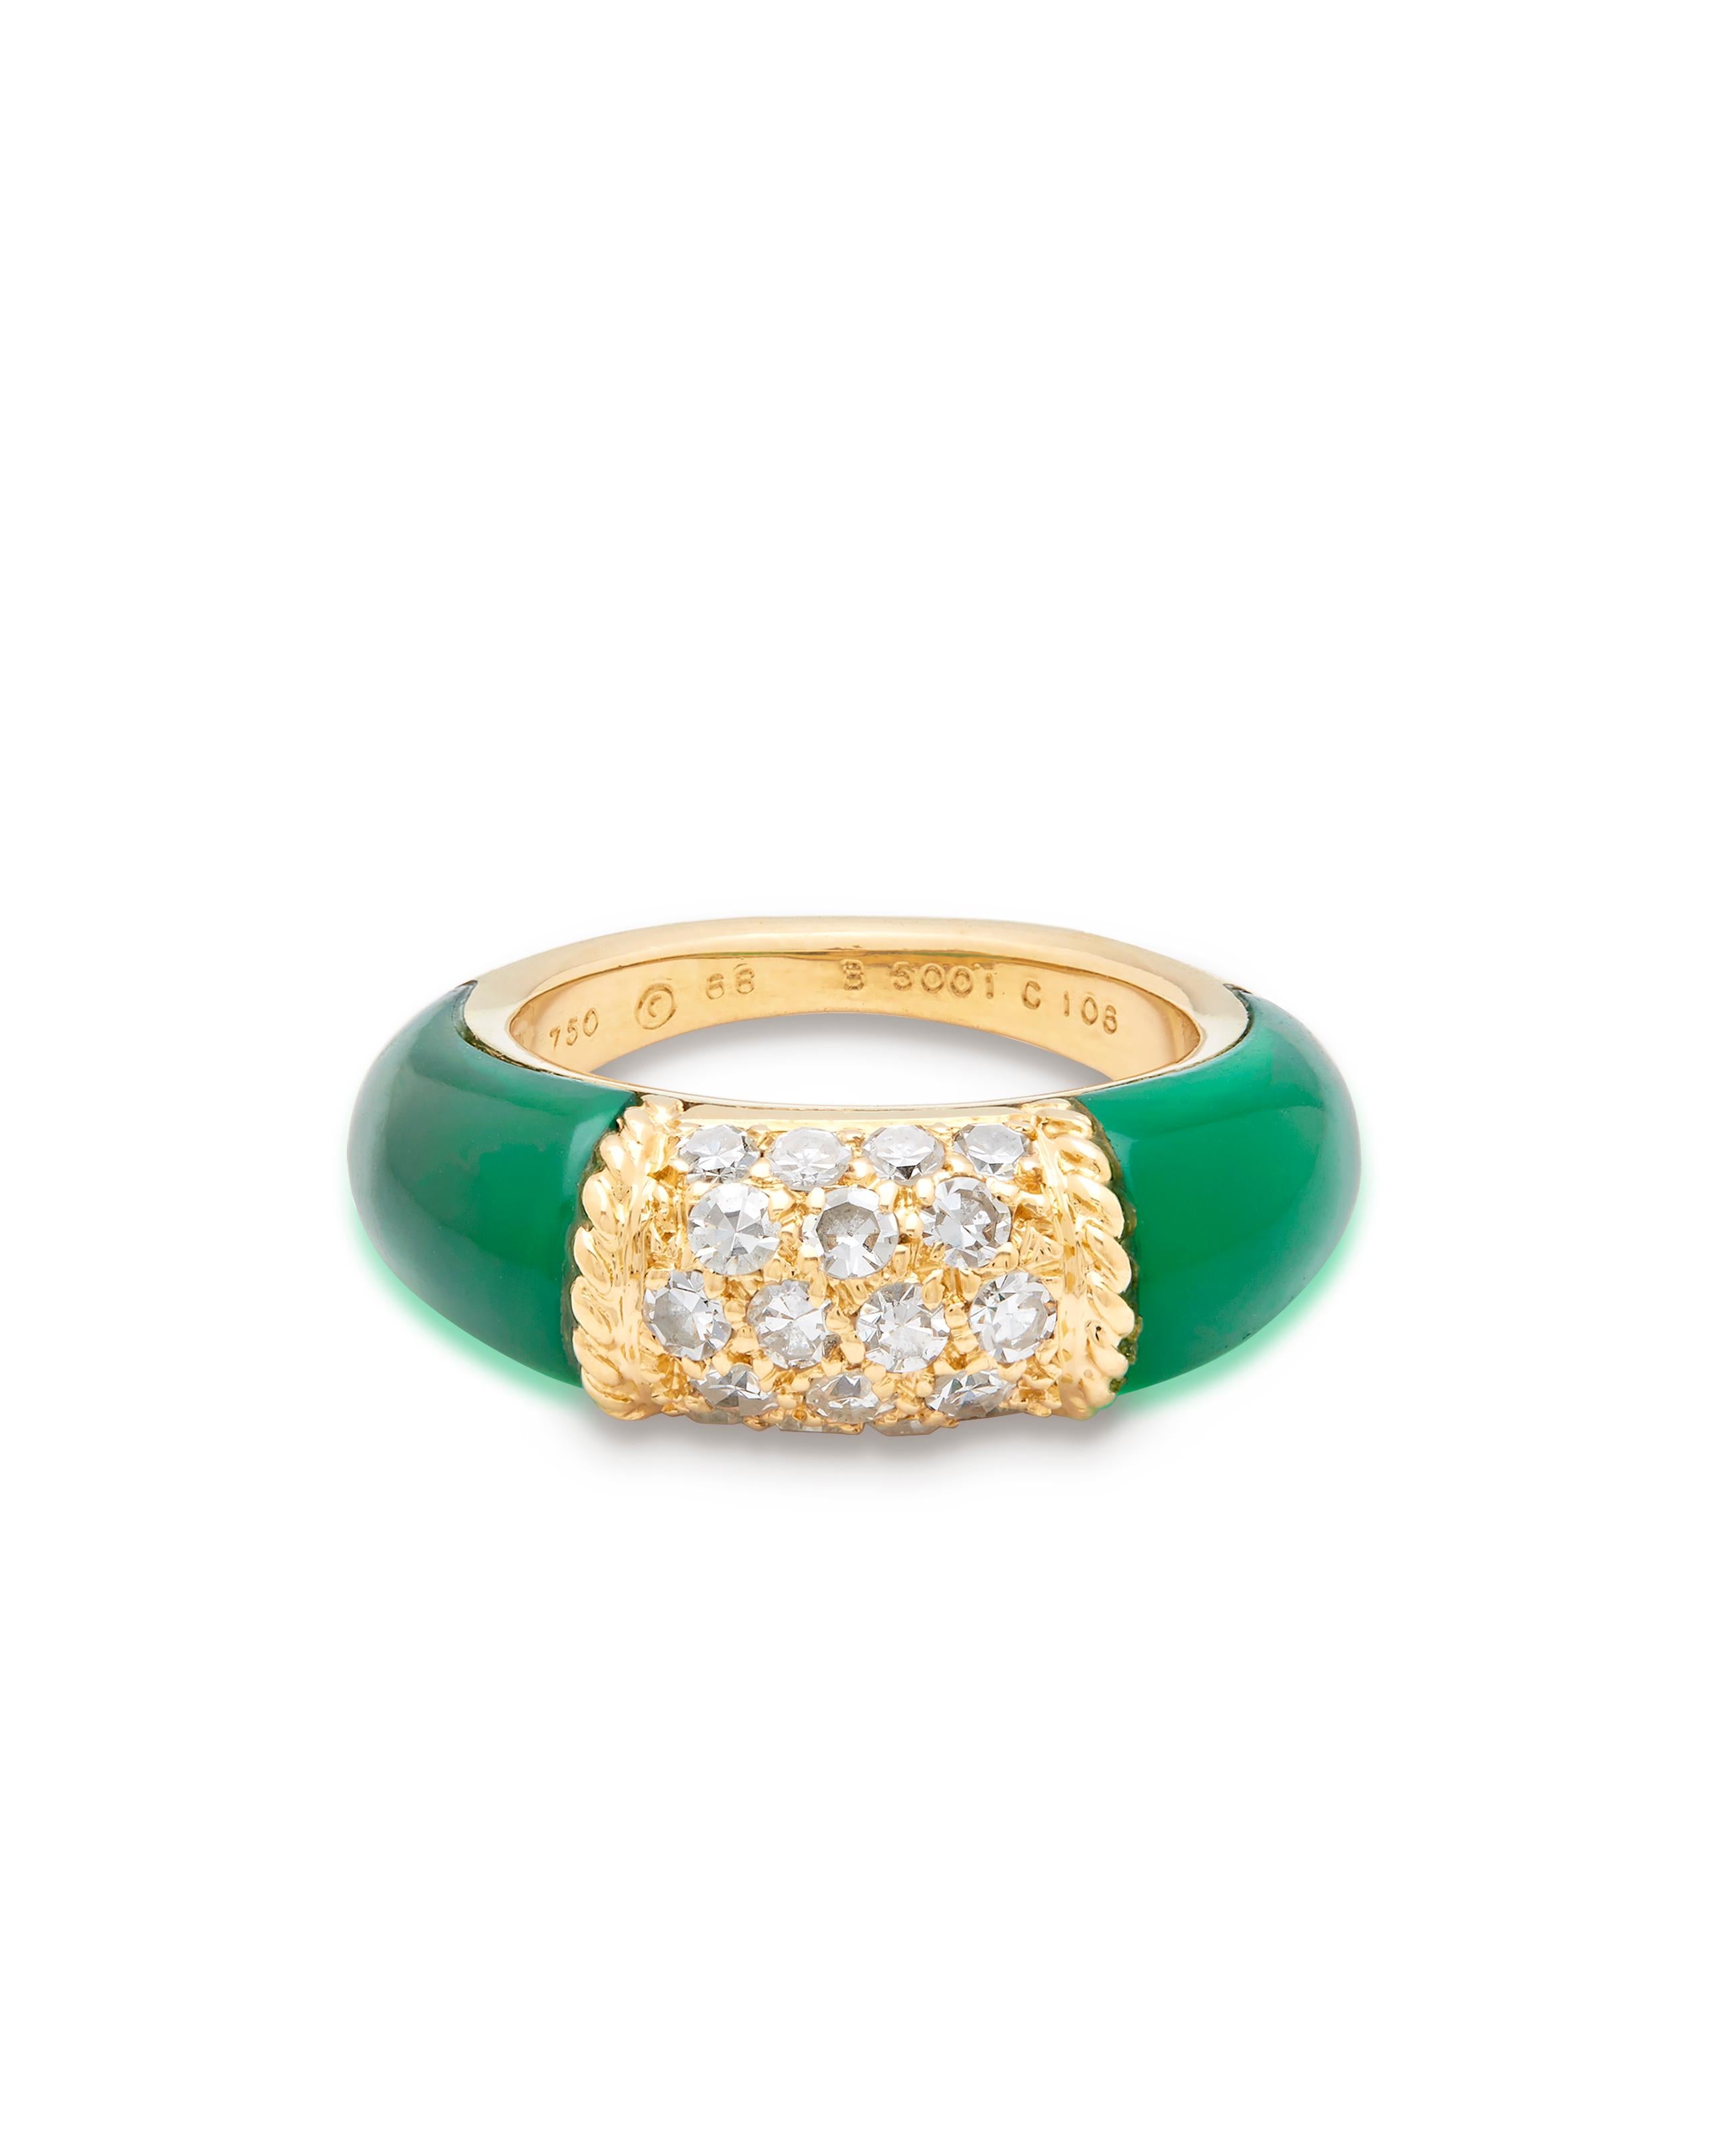 18ct gold Very Rare Van Cleef & Arpels PHILIPPINES ring 

Set with 2 polished green Chrysoprase hard stones either side of a Diamond Pave centre. 

Van Cleef & Arpeks arguably the Master of all French Maisons presents this absolute classic style,